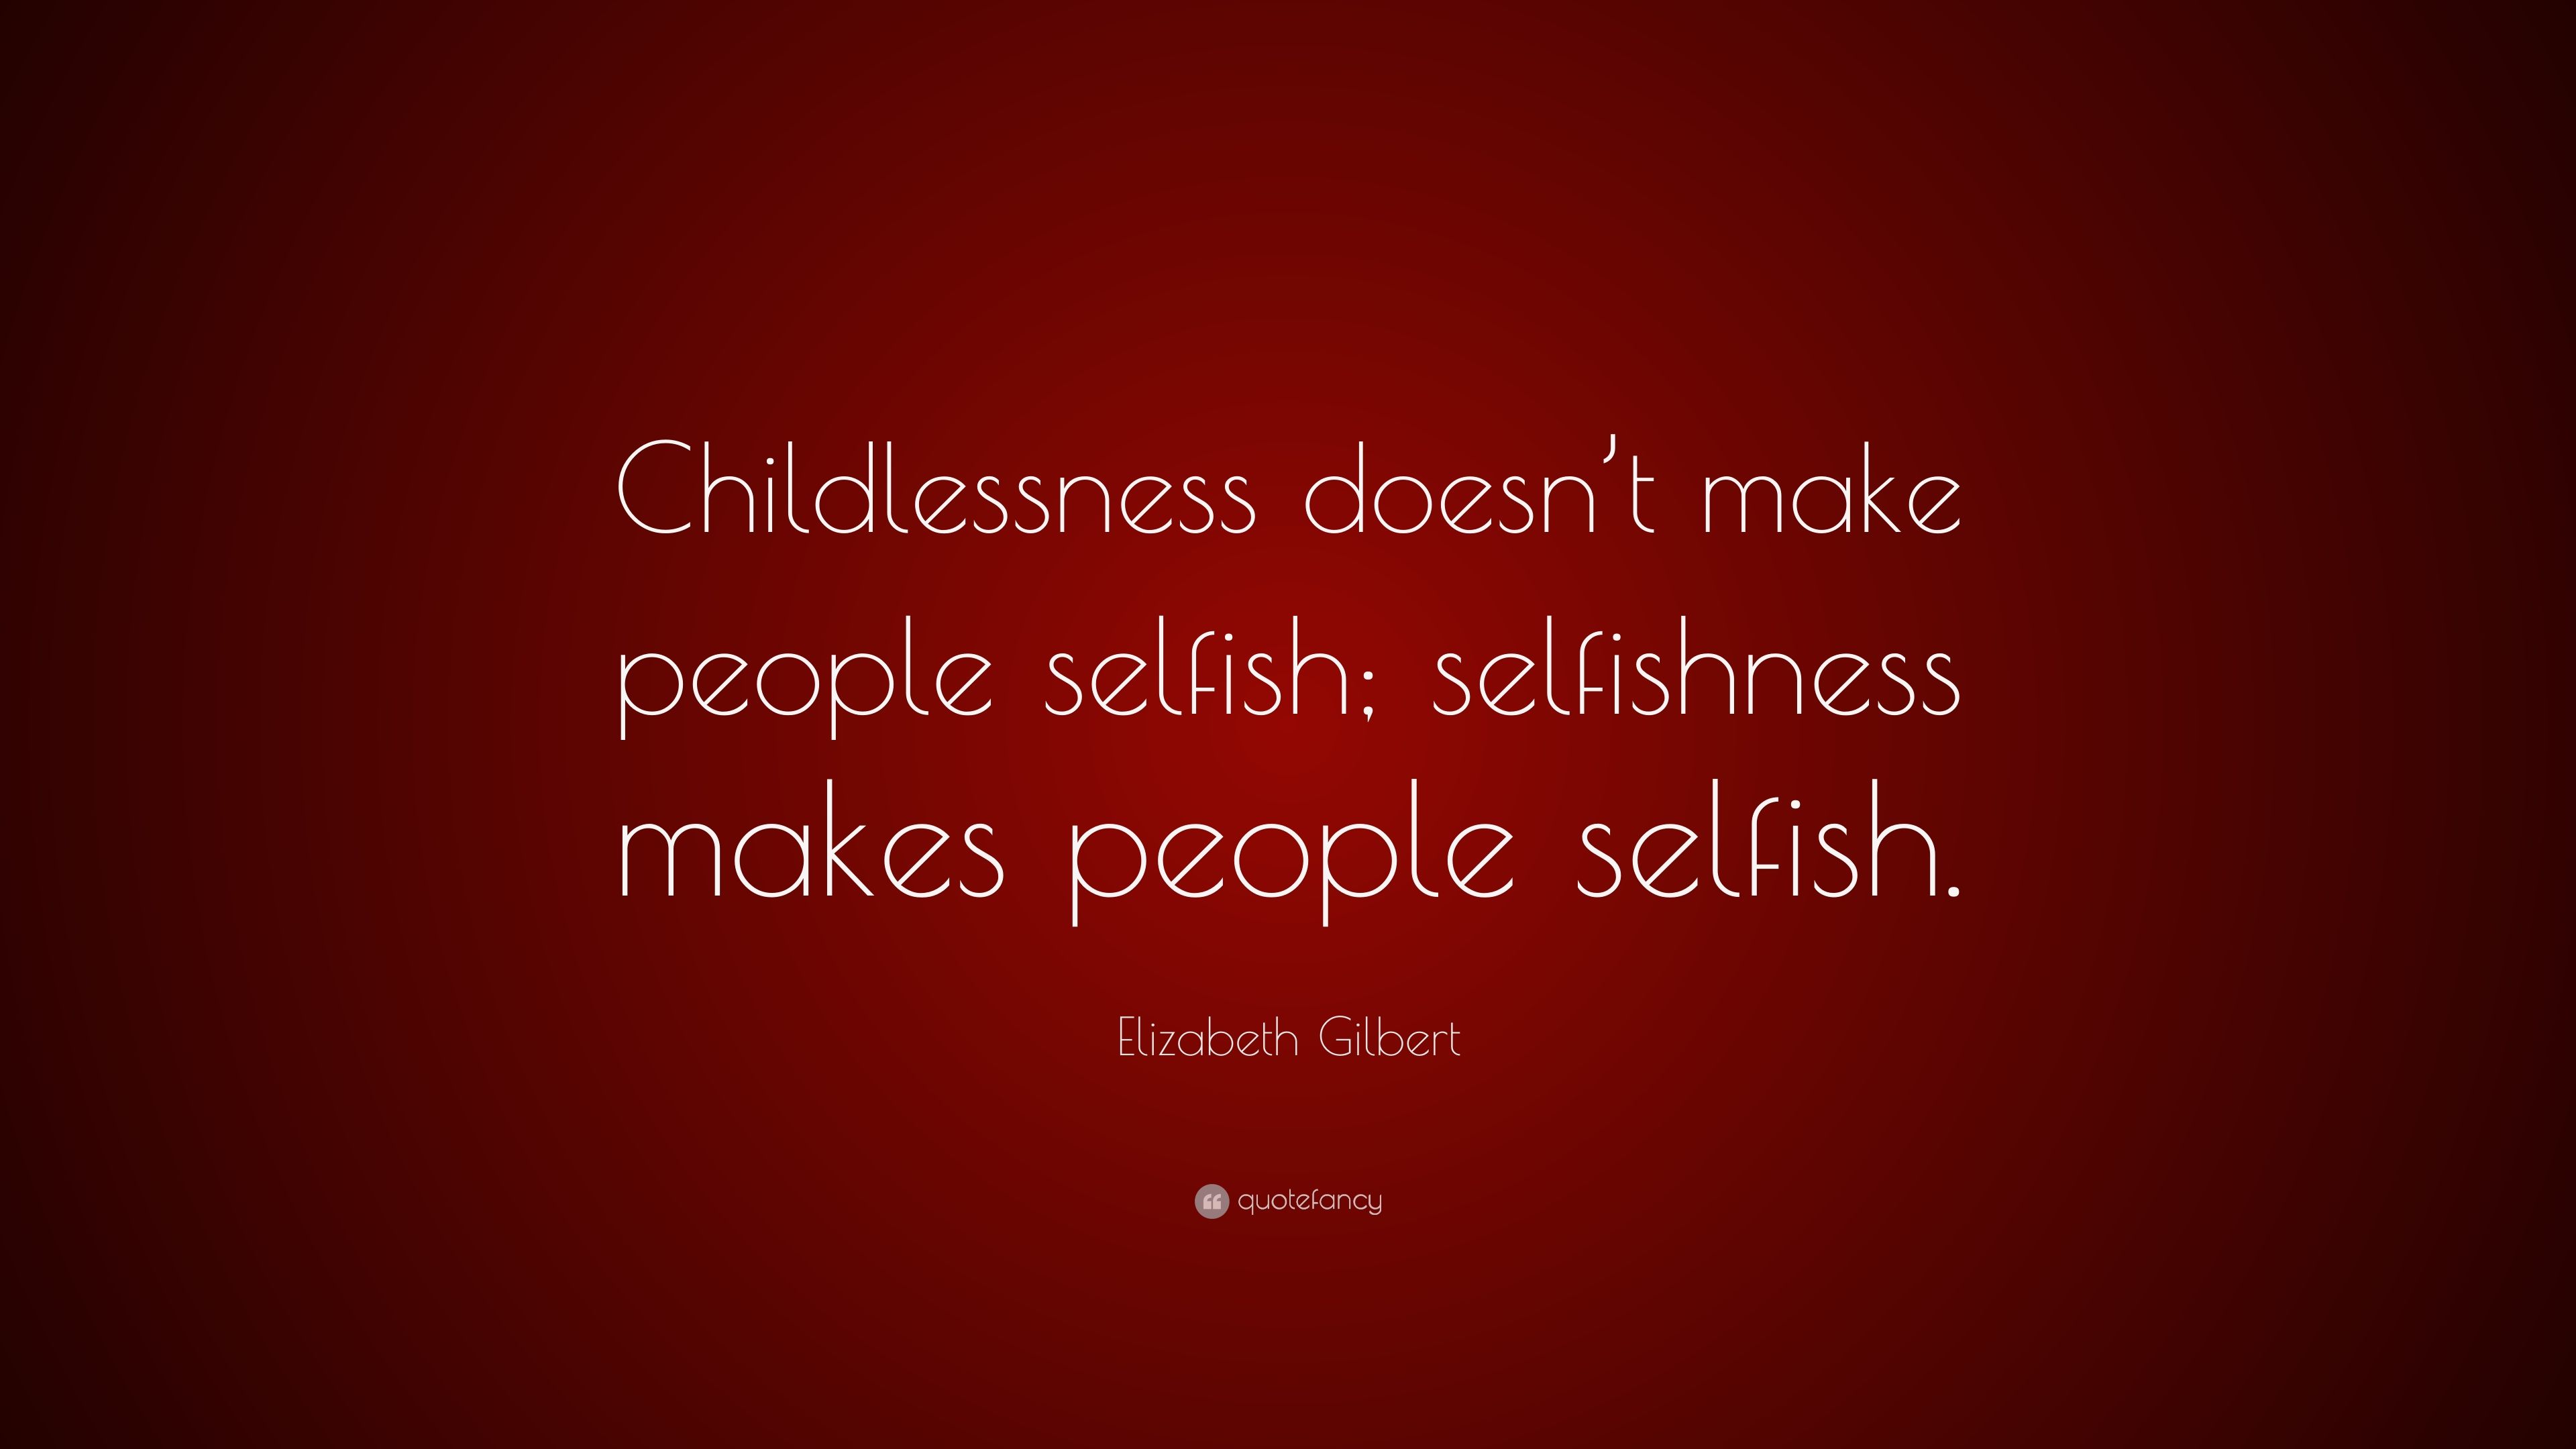 Elizabeth Gilbert Quote: “Childlessness doesn't make people